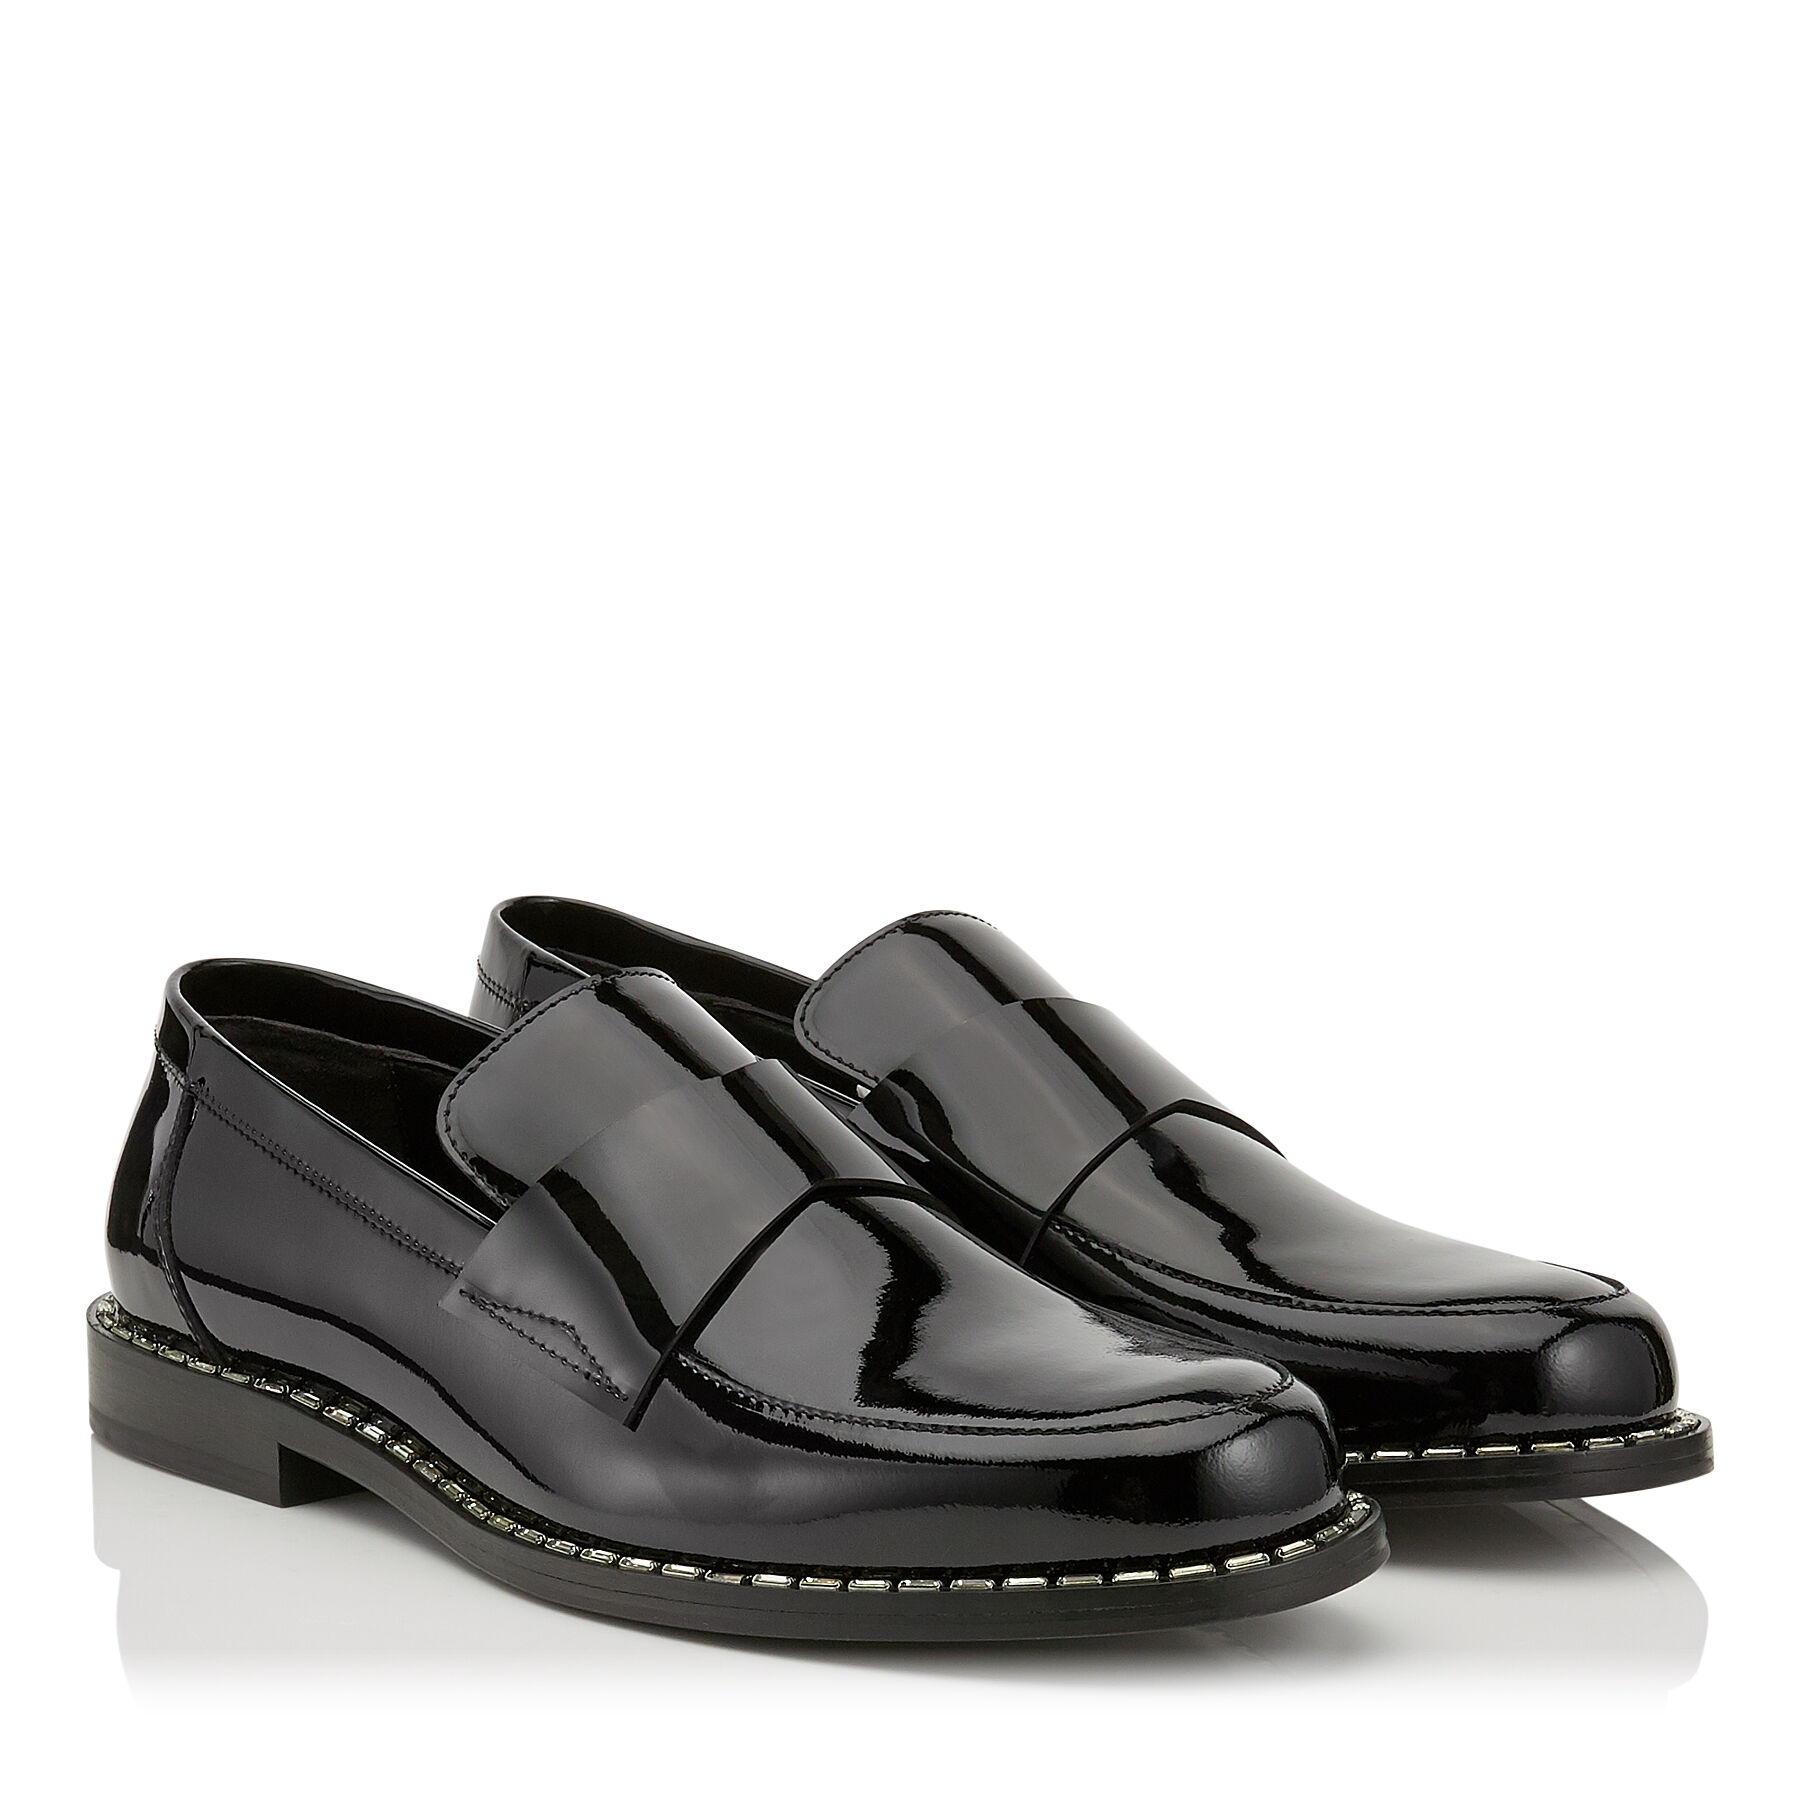 Black Patent Leather Loafers with Crystal Trim | BANE | Cruise 19 